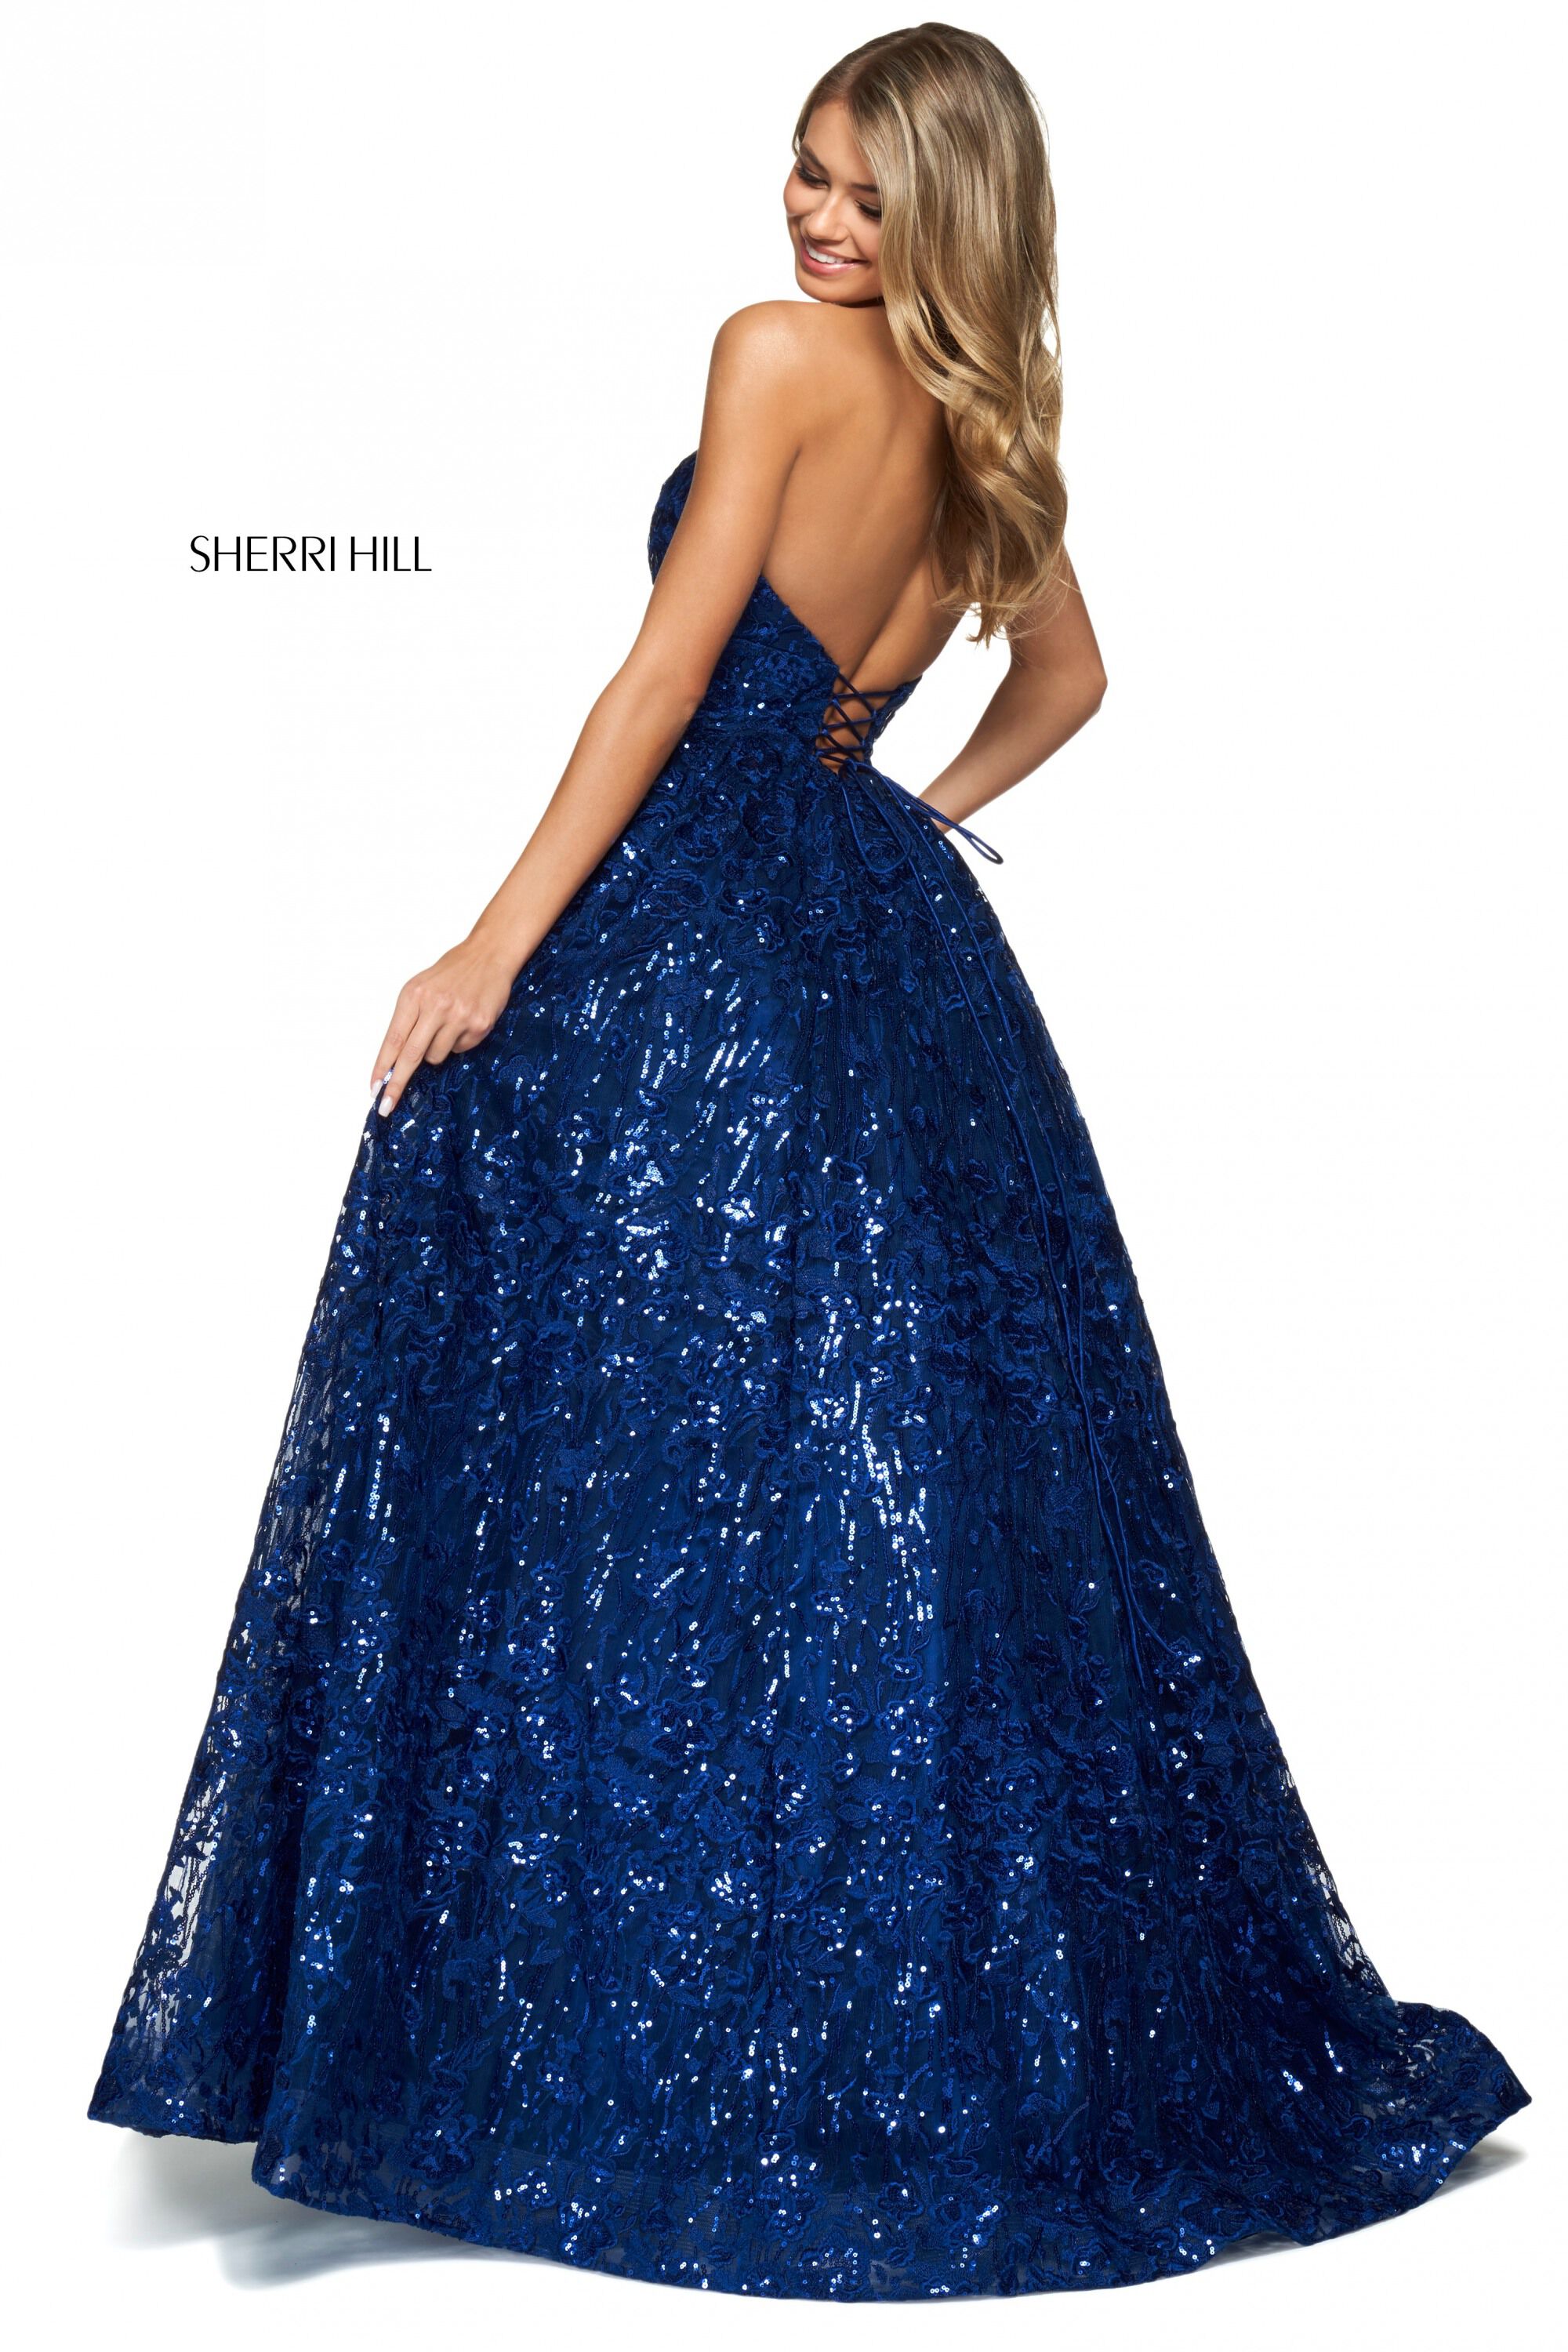 style № 53655 designed by SherriHill